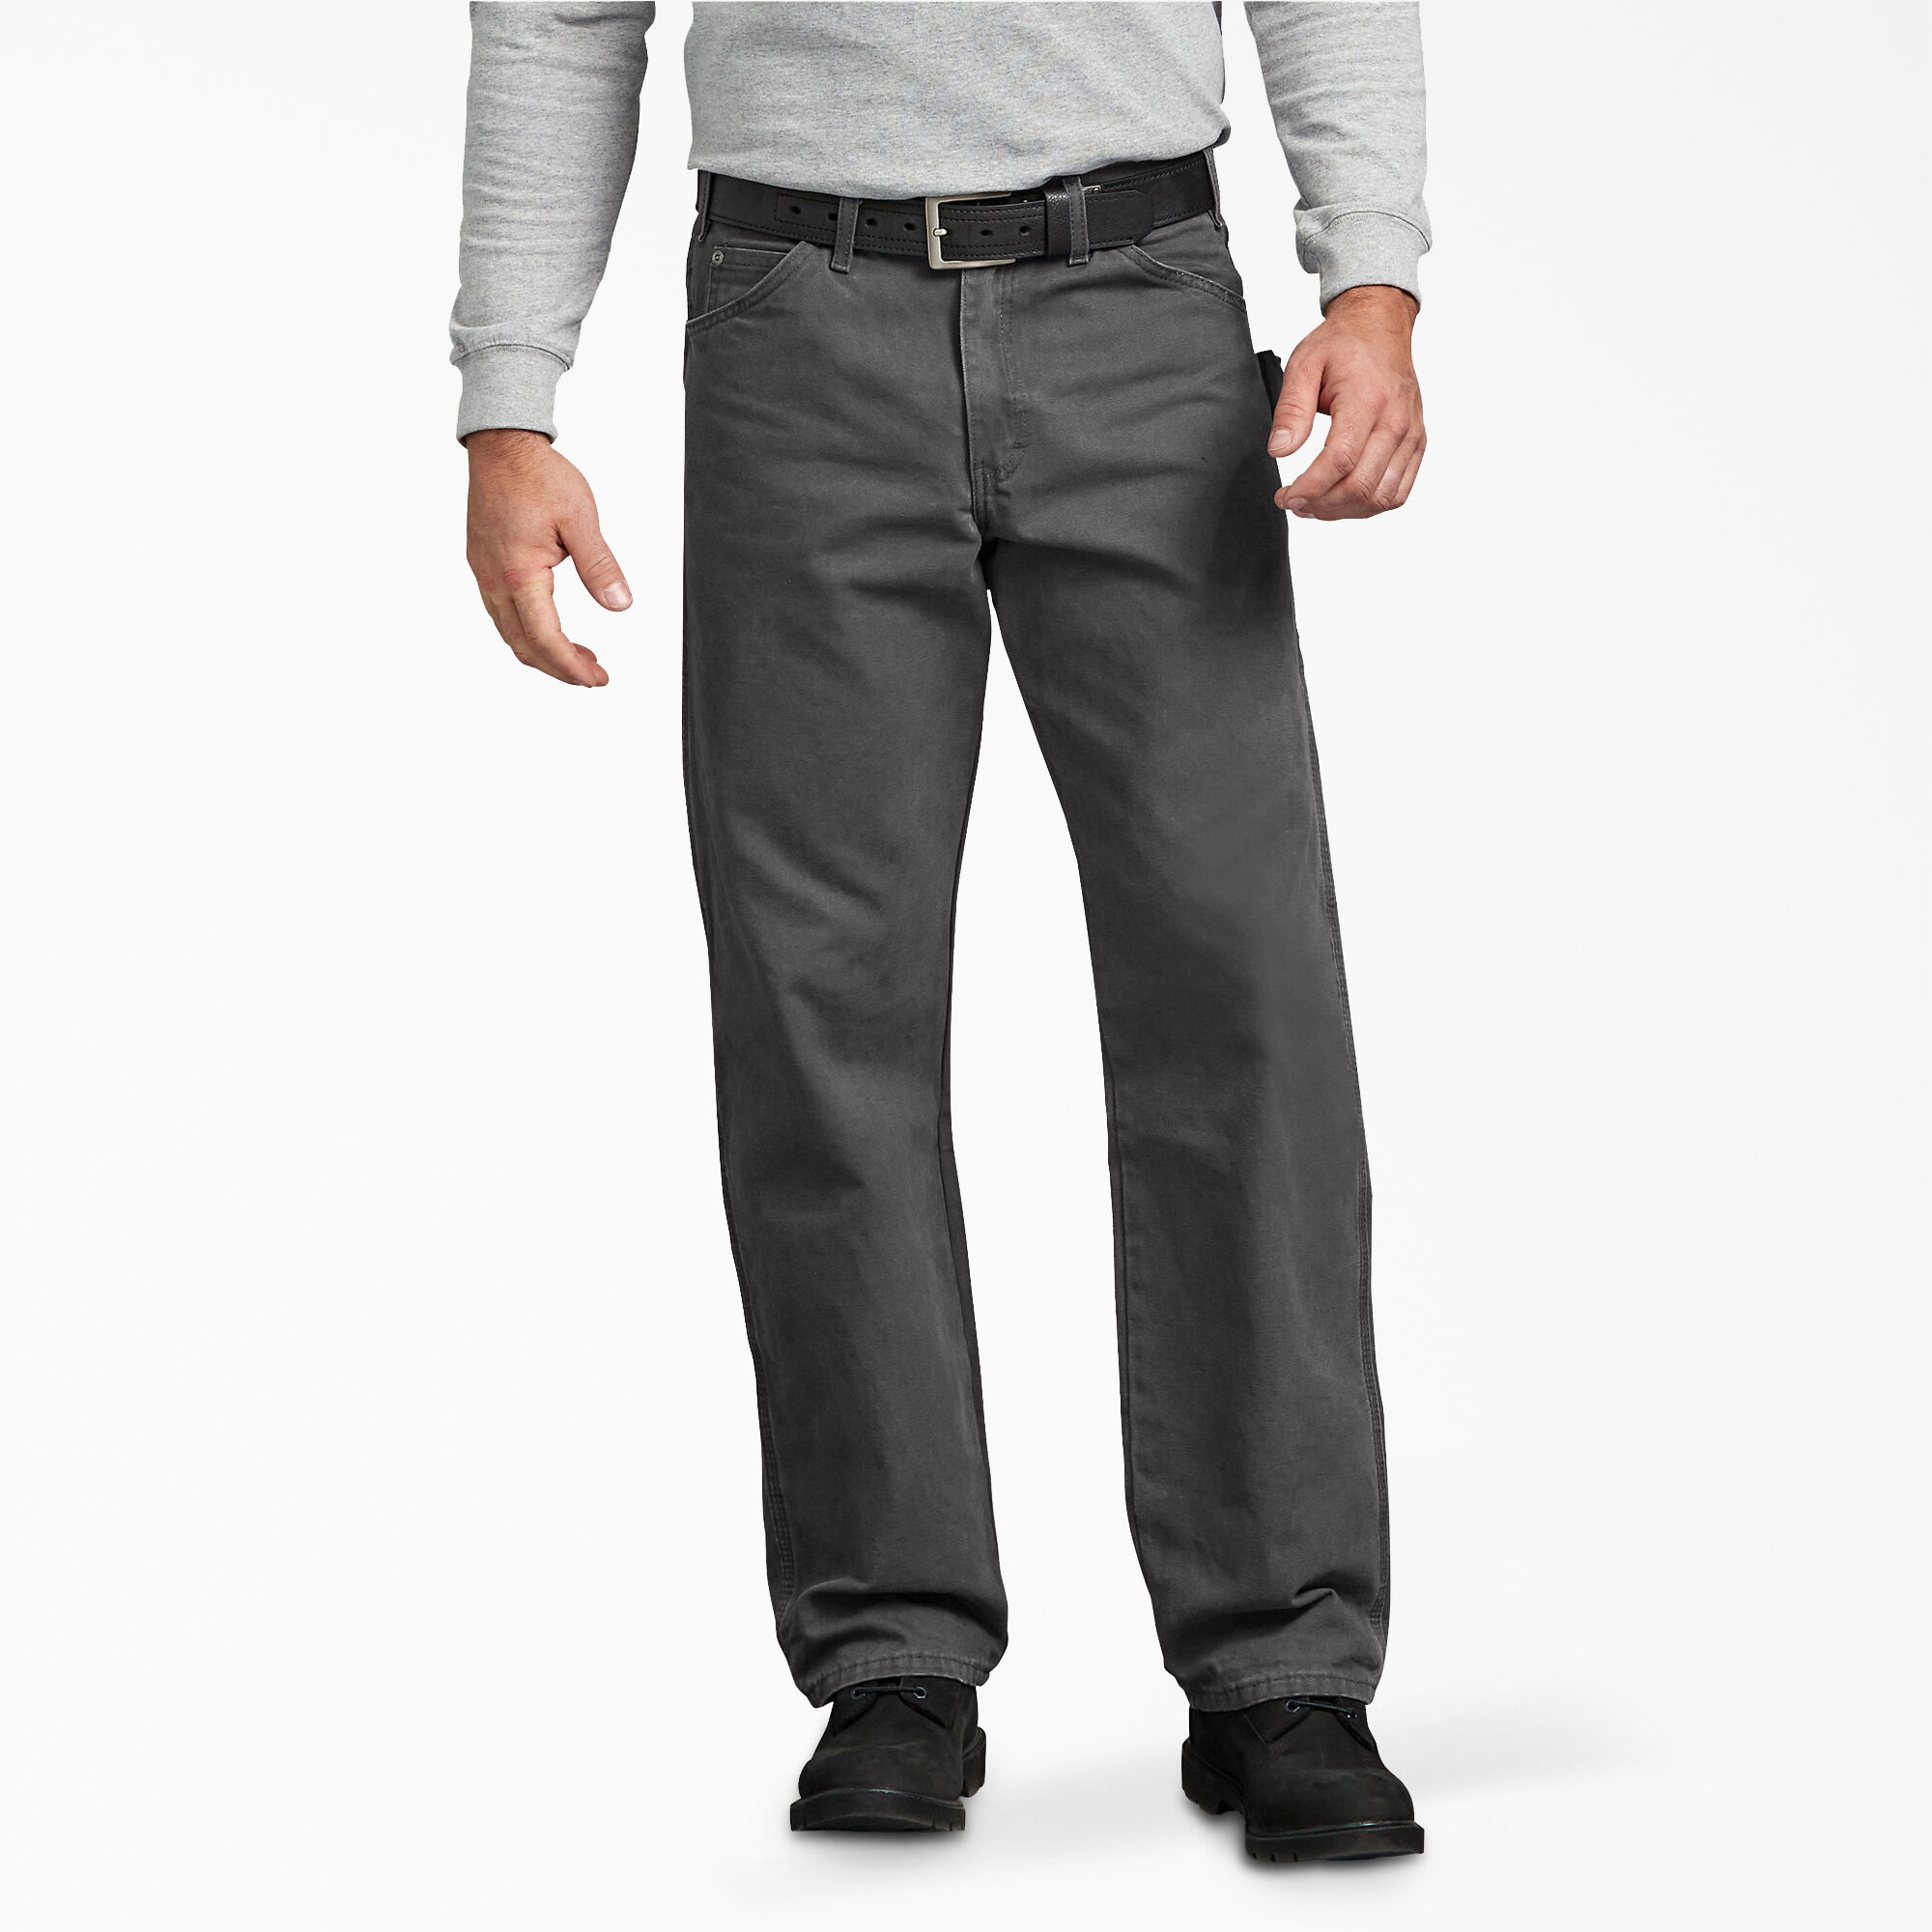 Sanded Jeans For Men , Rinsed Slate | Relaxed Fit Duck Jeans | Dickies